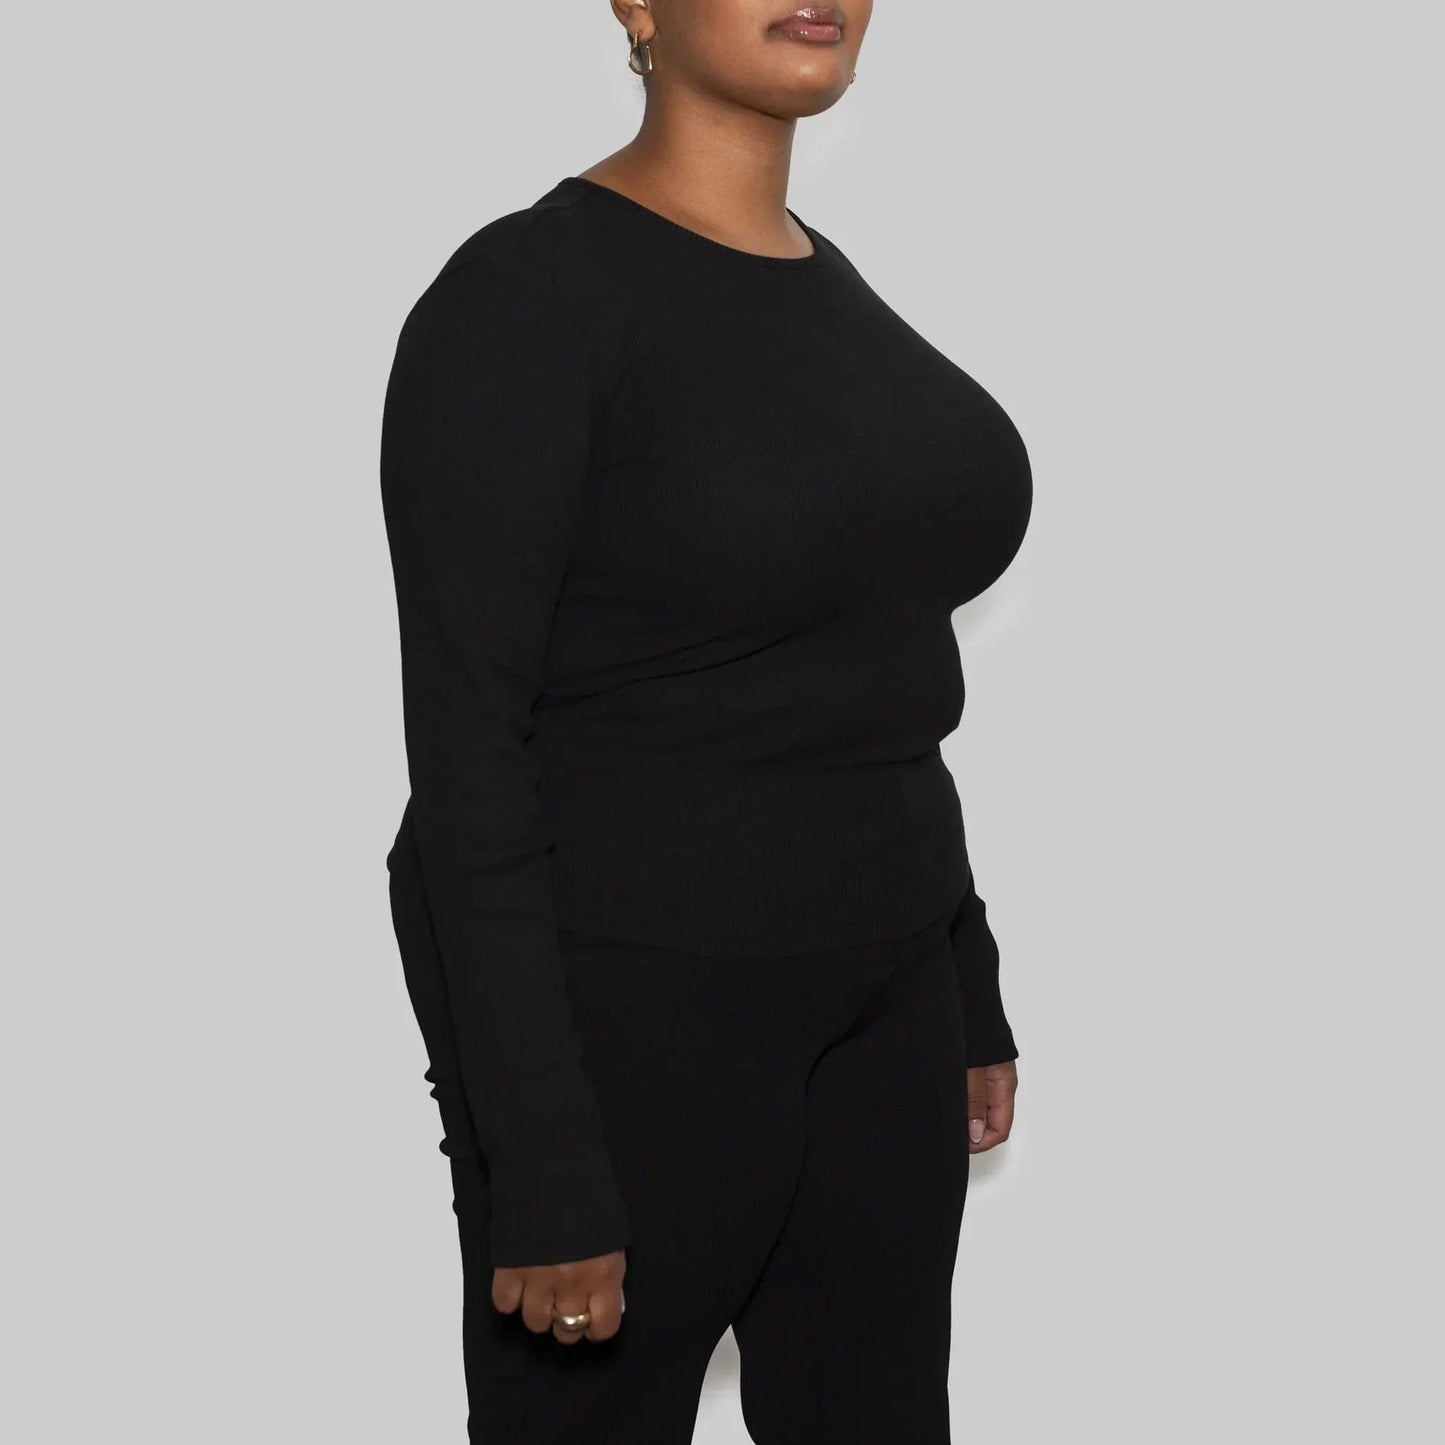 5 Pack | Women’s Rib Long Sleeve Tops, Recycled Cotton, Black